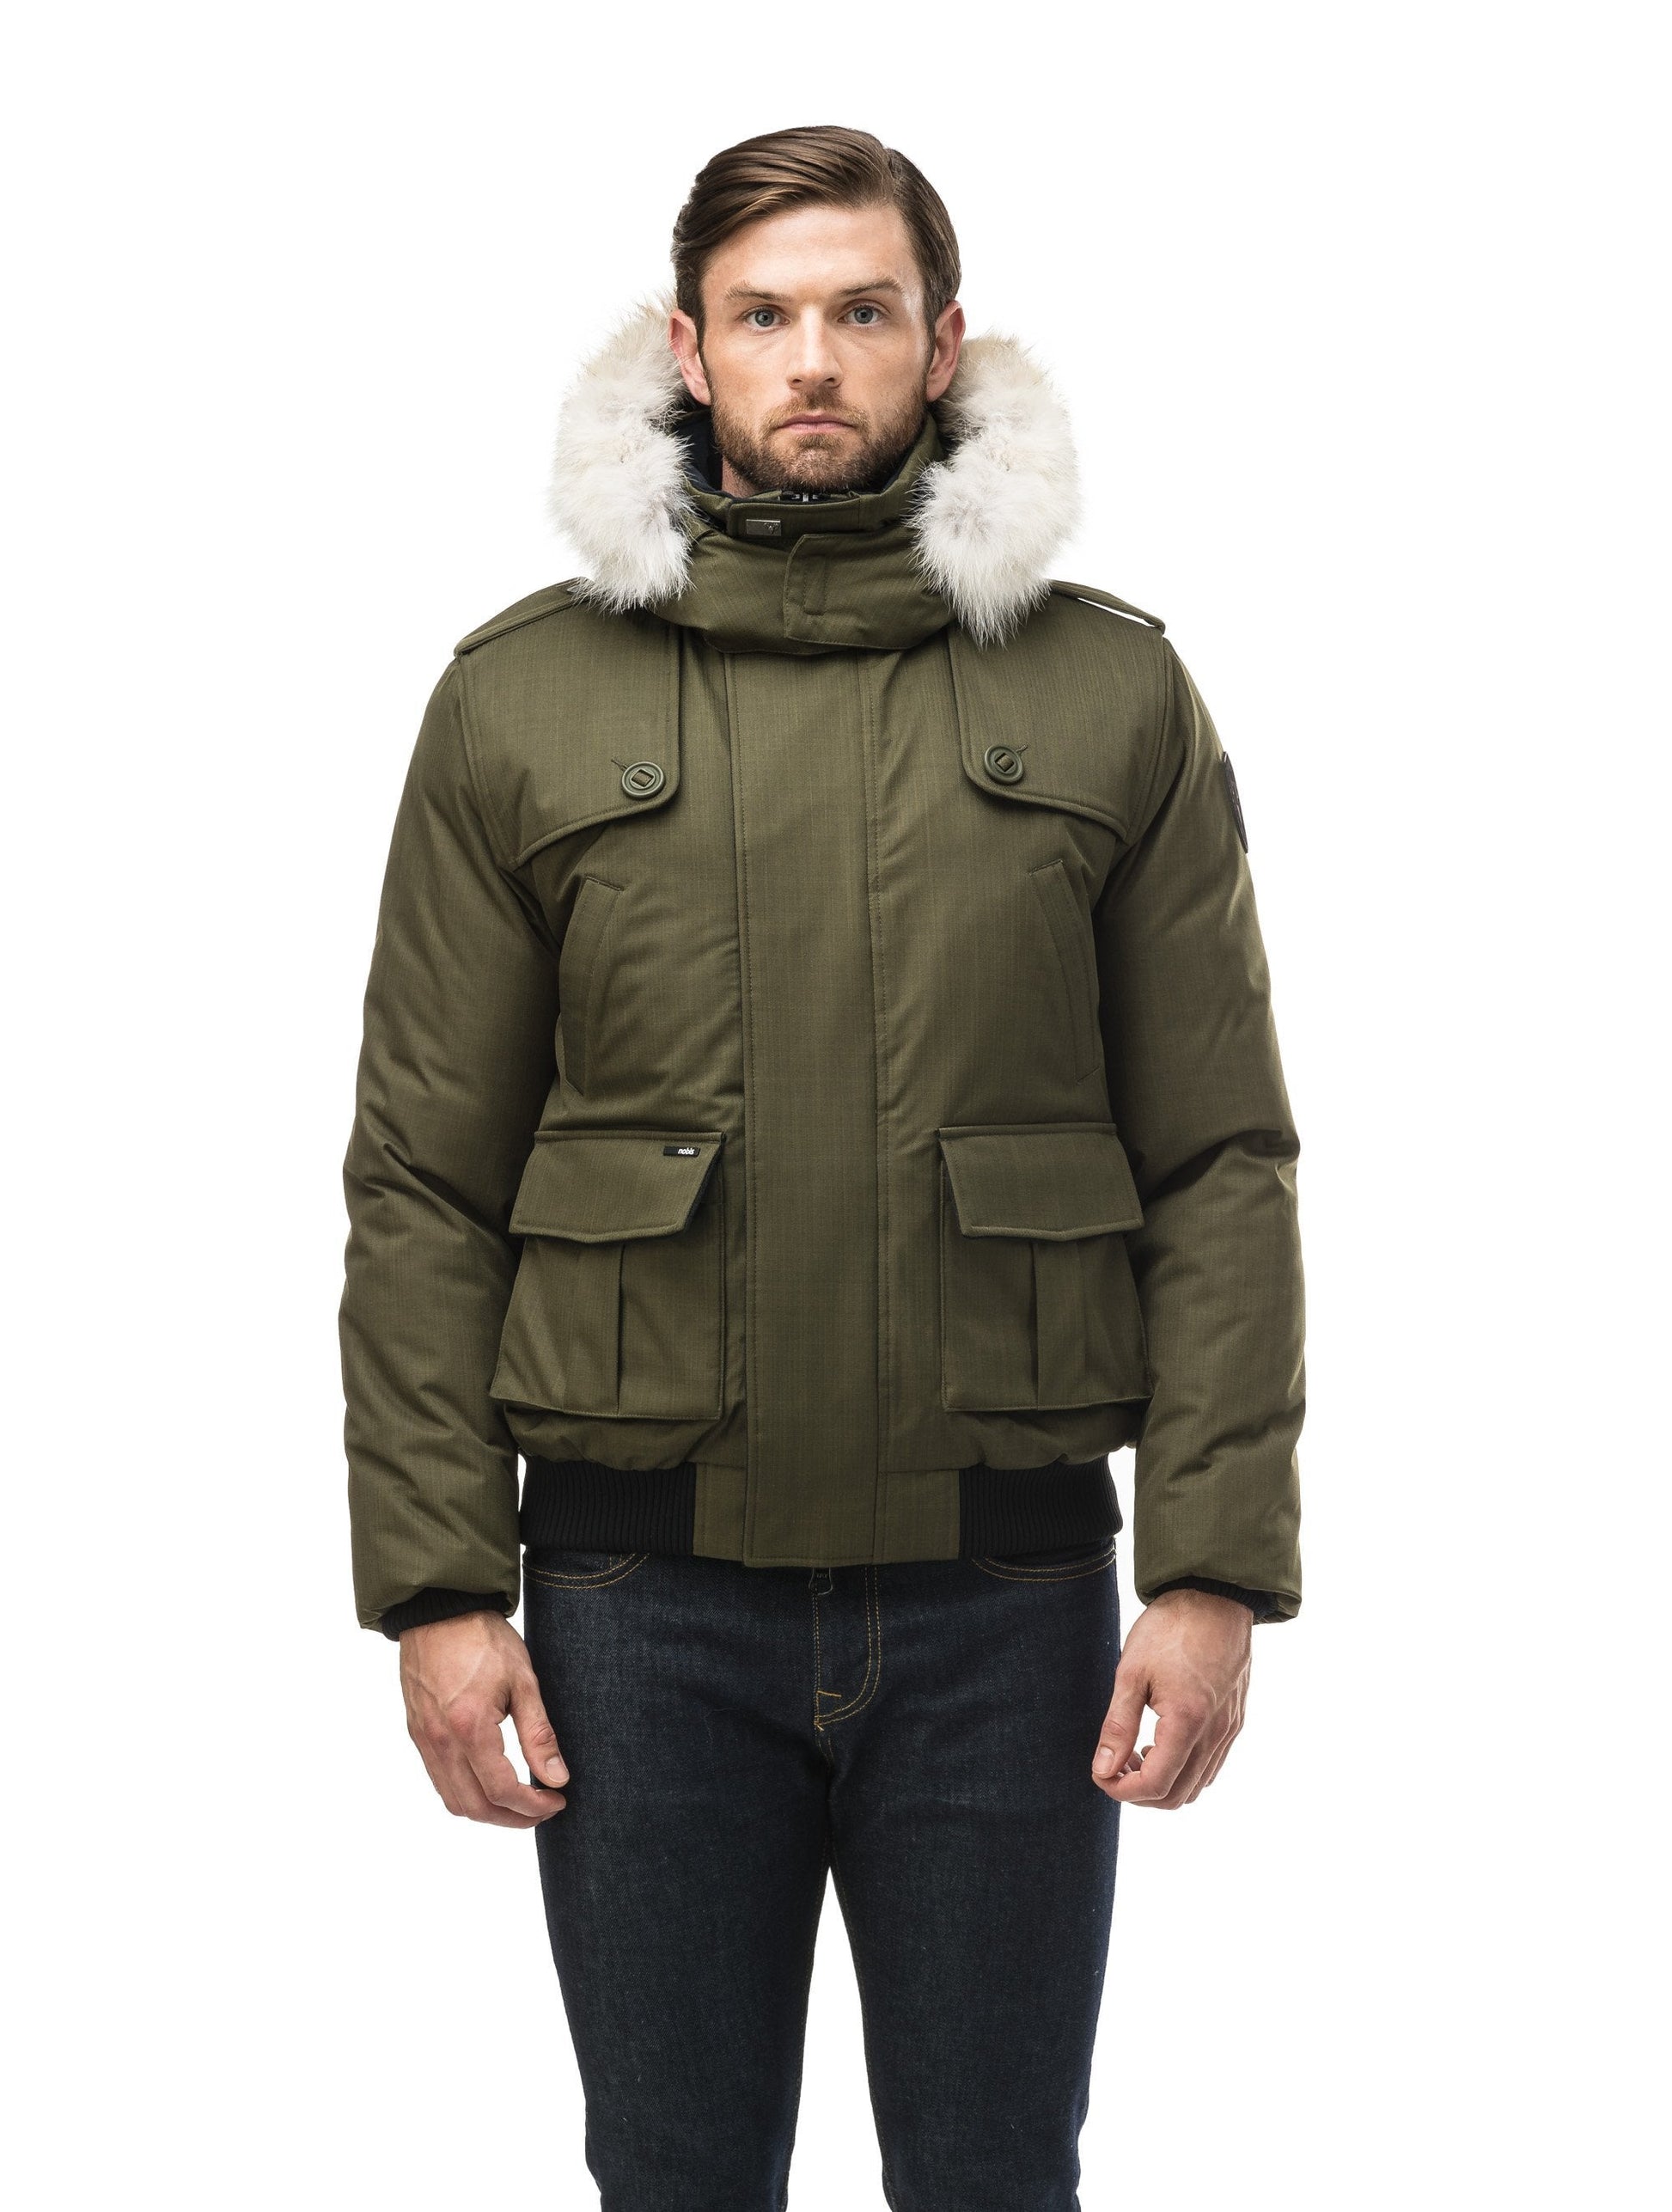 Men's down filled bomber that sits just above the hips with a completely removable hood that's windproof, waterproof, and breathable in CH Fatigue